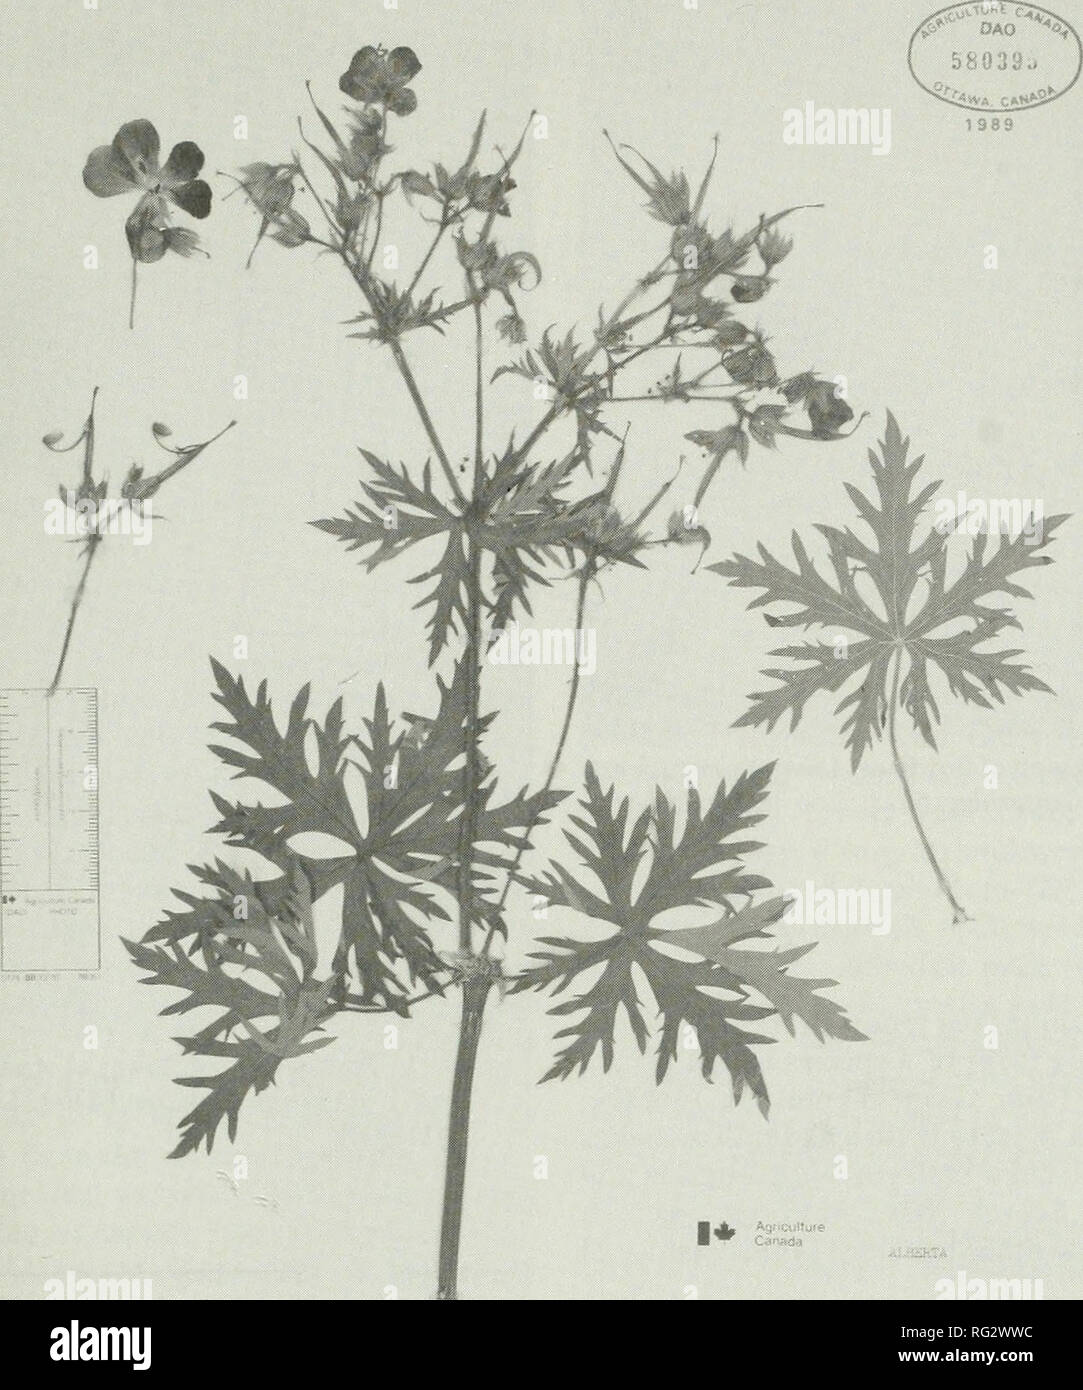 . The Canadian field-naturalist. 1990 Notes 601. Figure 1. Photograph of specimen of Geranium pratense [G. W. Scatter 88105 Edmonton, Alta. (DAO)]. In the herbarium of the Biosystematics Research Centre (DAO) there is specimen of a white- flowered form of G. pratense grown by Dr. George Turner at Fort Saskatchewan, a few miles northeast of Edmonton. At the Edmonton site, about 120-150 plants of the typical mauve- flowered form of G. pratense were found. These plants may have escaped from a former garden since two other cultivated plants, Saponaria officinalis L., Soapwort or Bouncing Bet {Scat Stock Photo